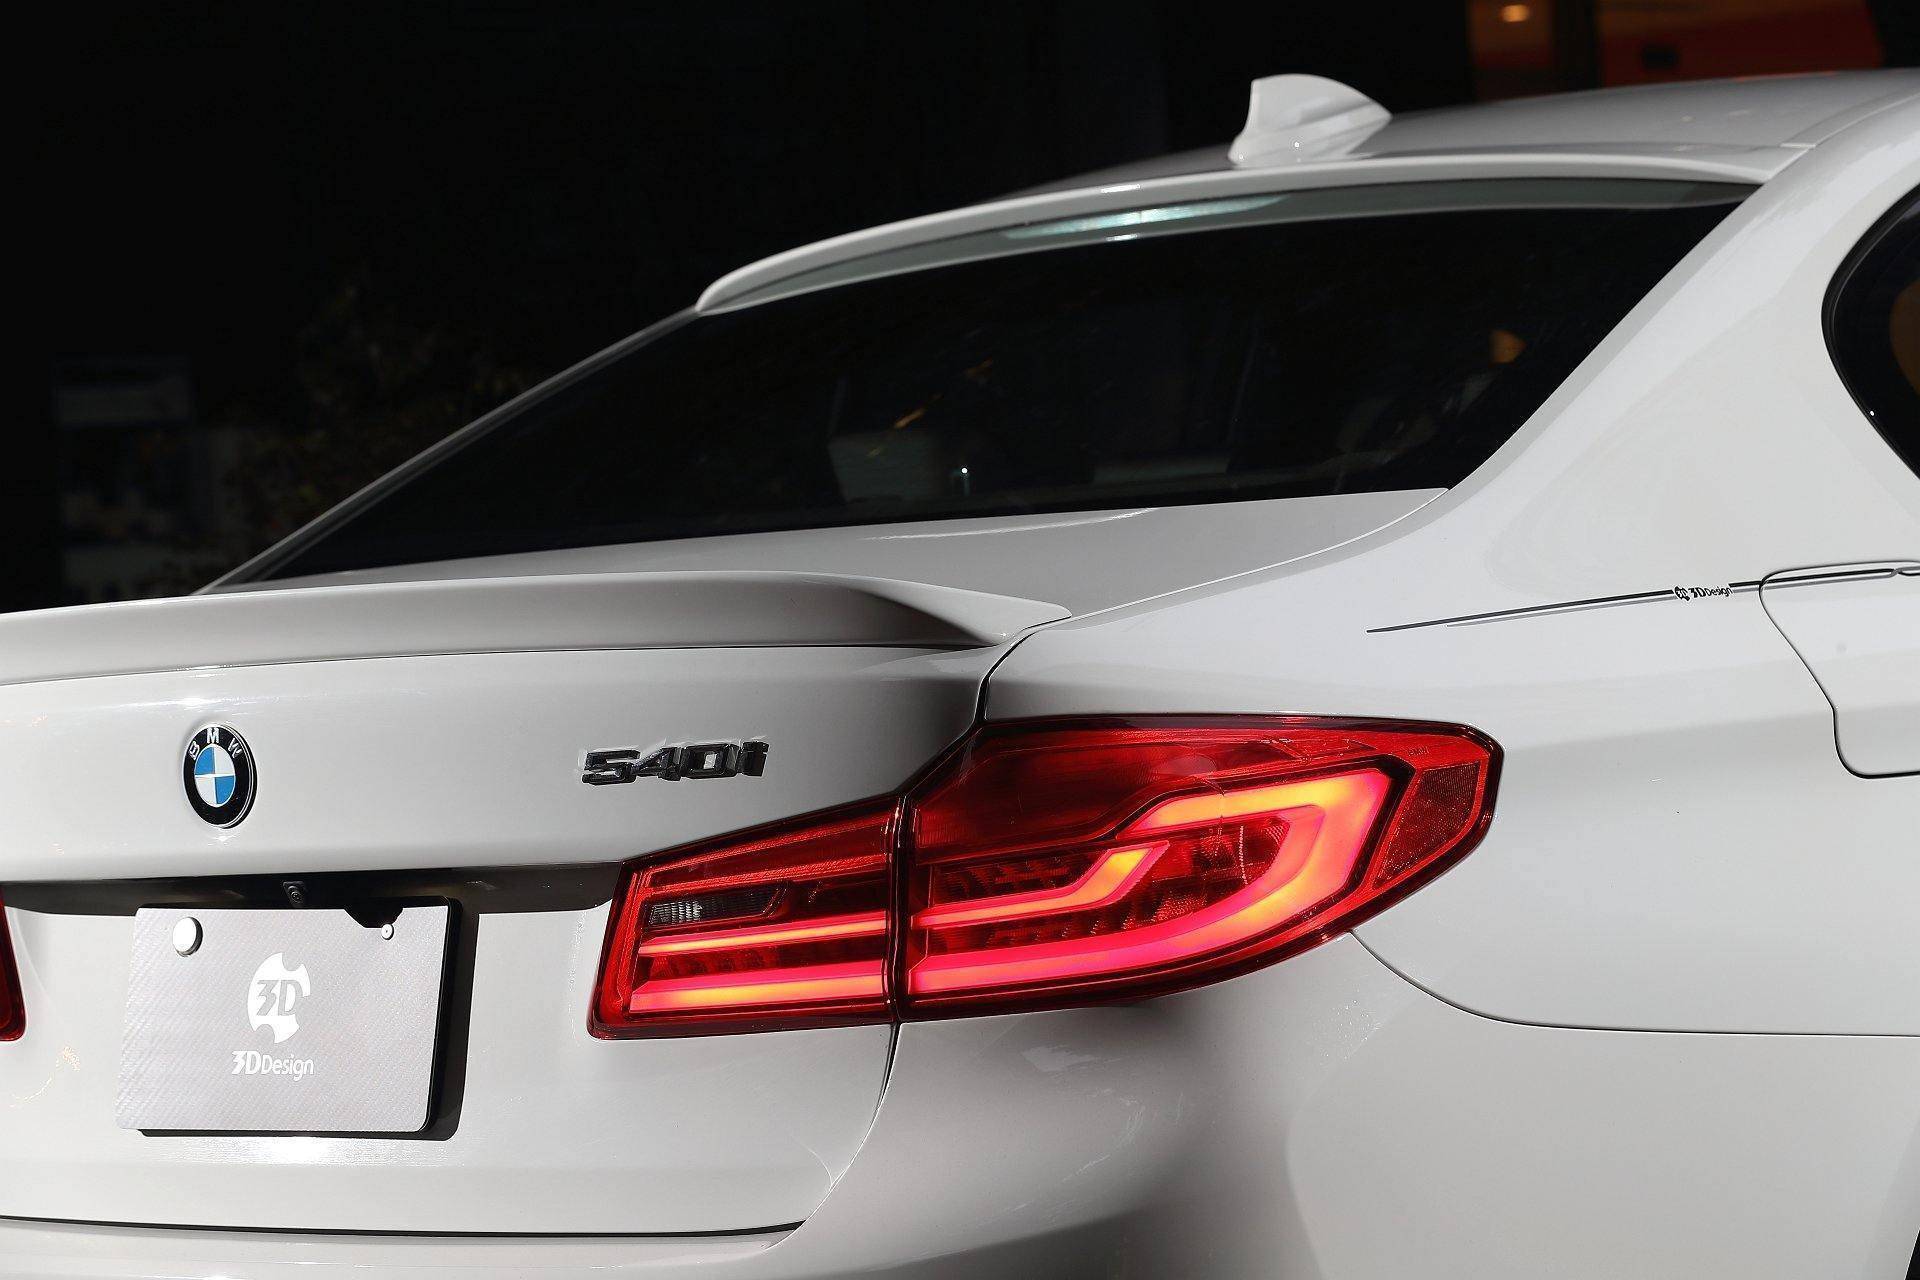 3DDesign Roof Spoiler for BMW 5 Series (2017+, G31)